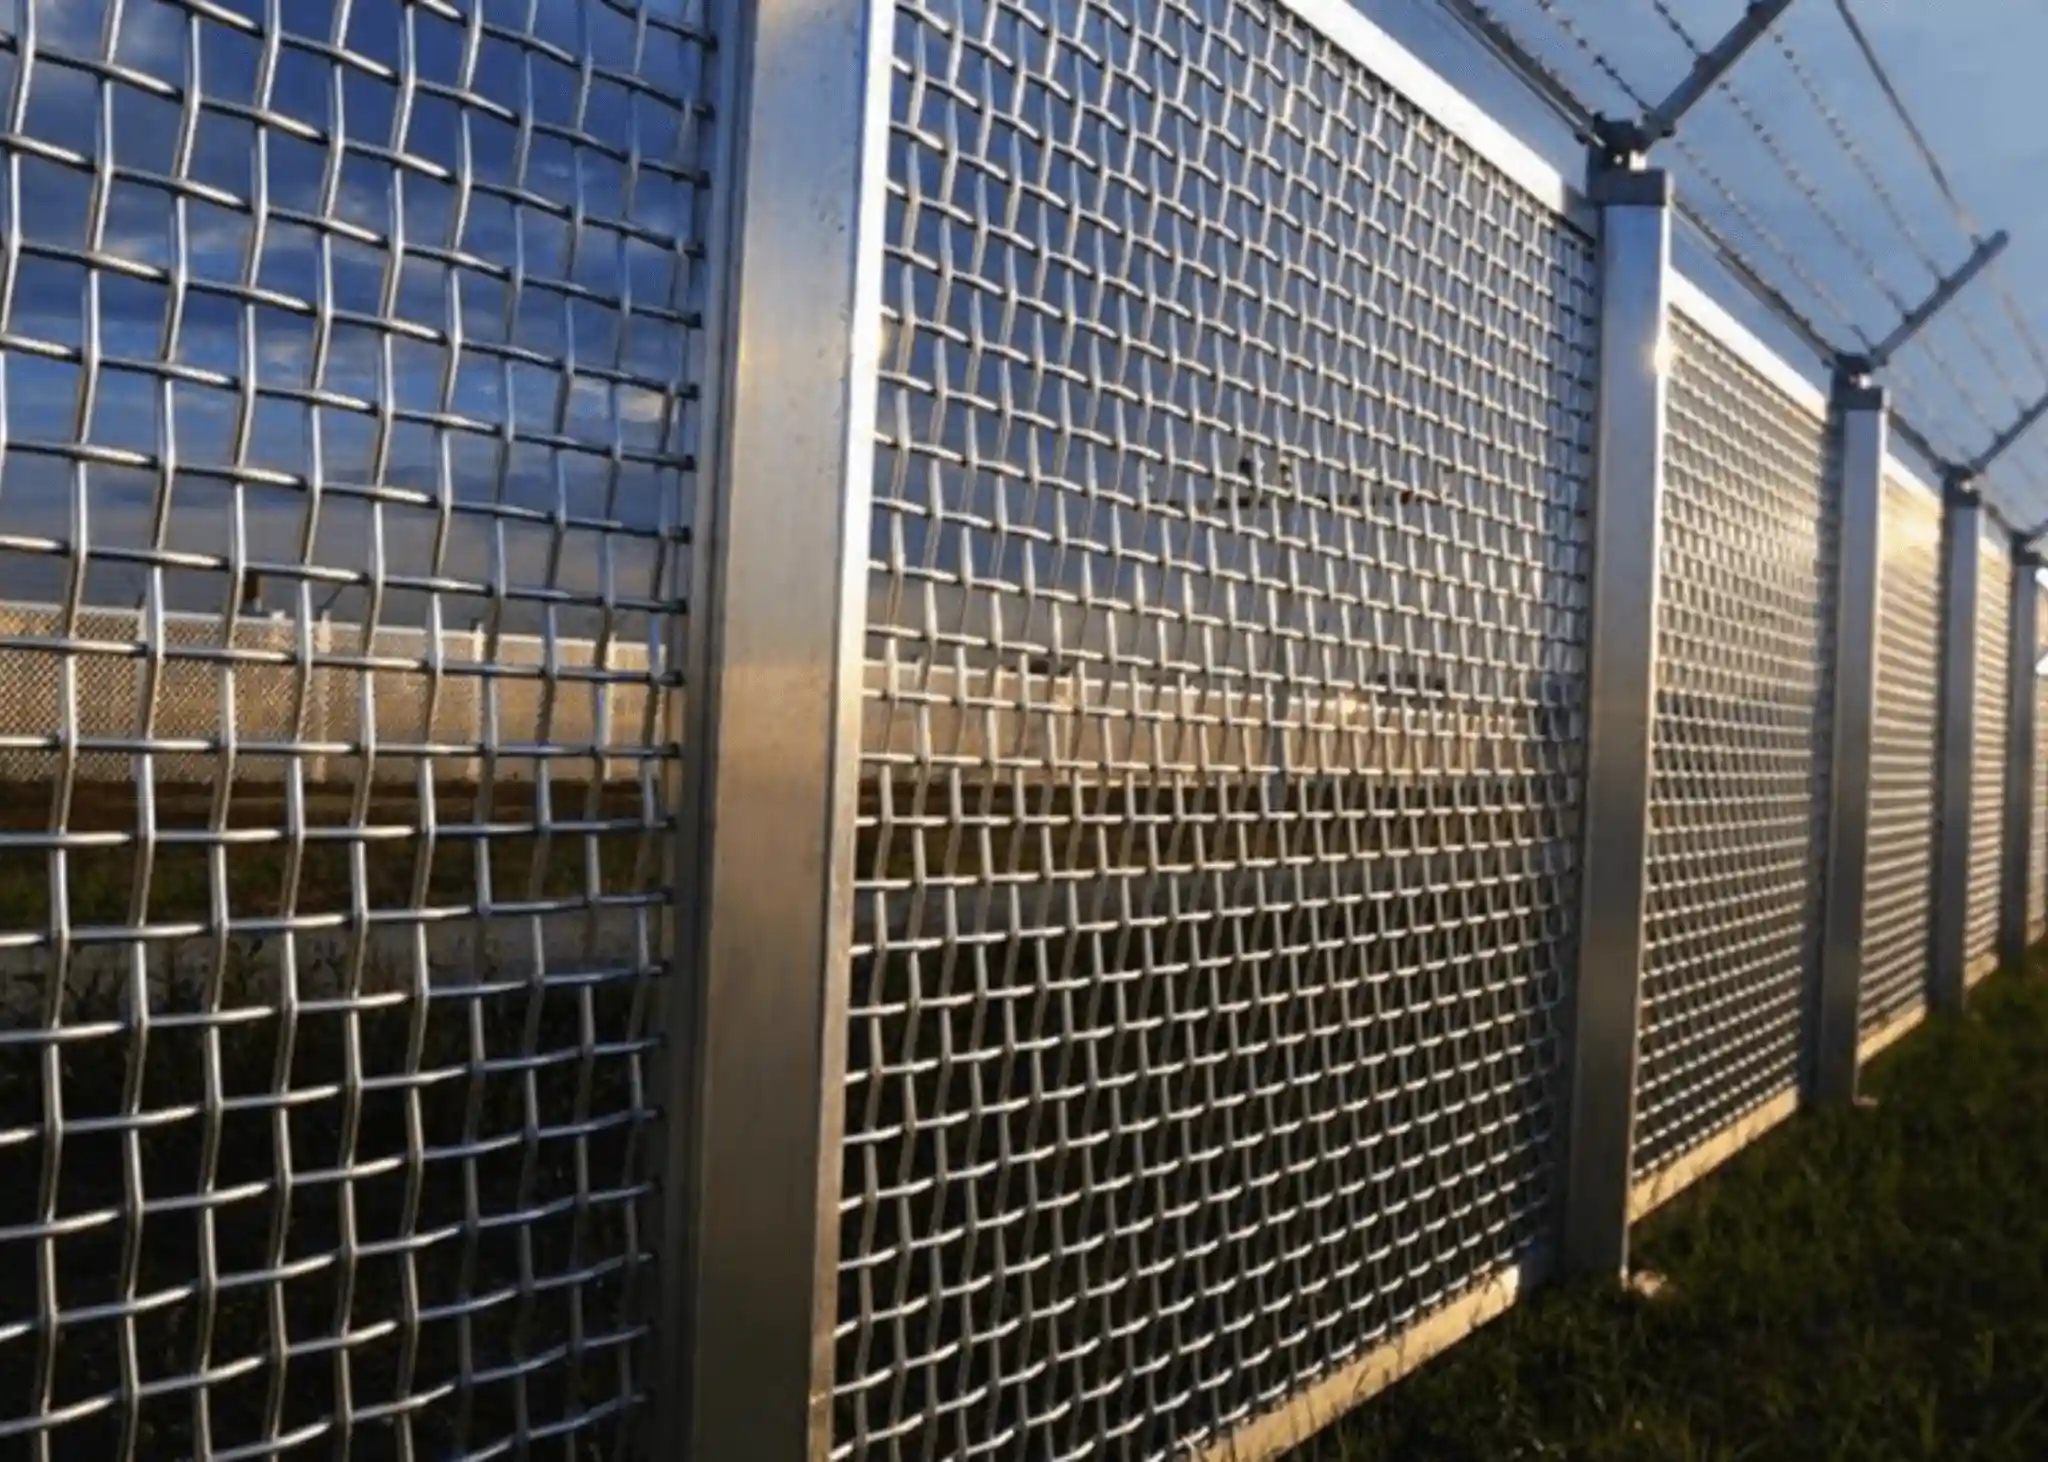 Woven Mesh Fencing